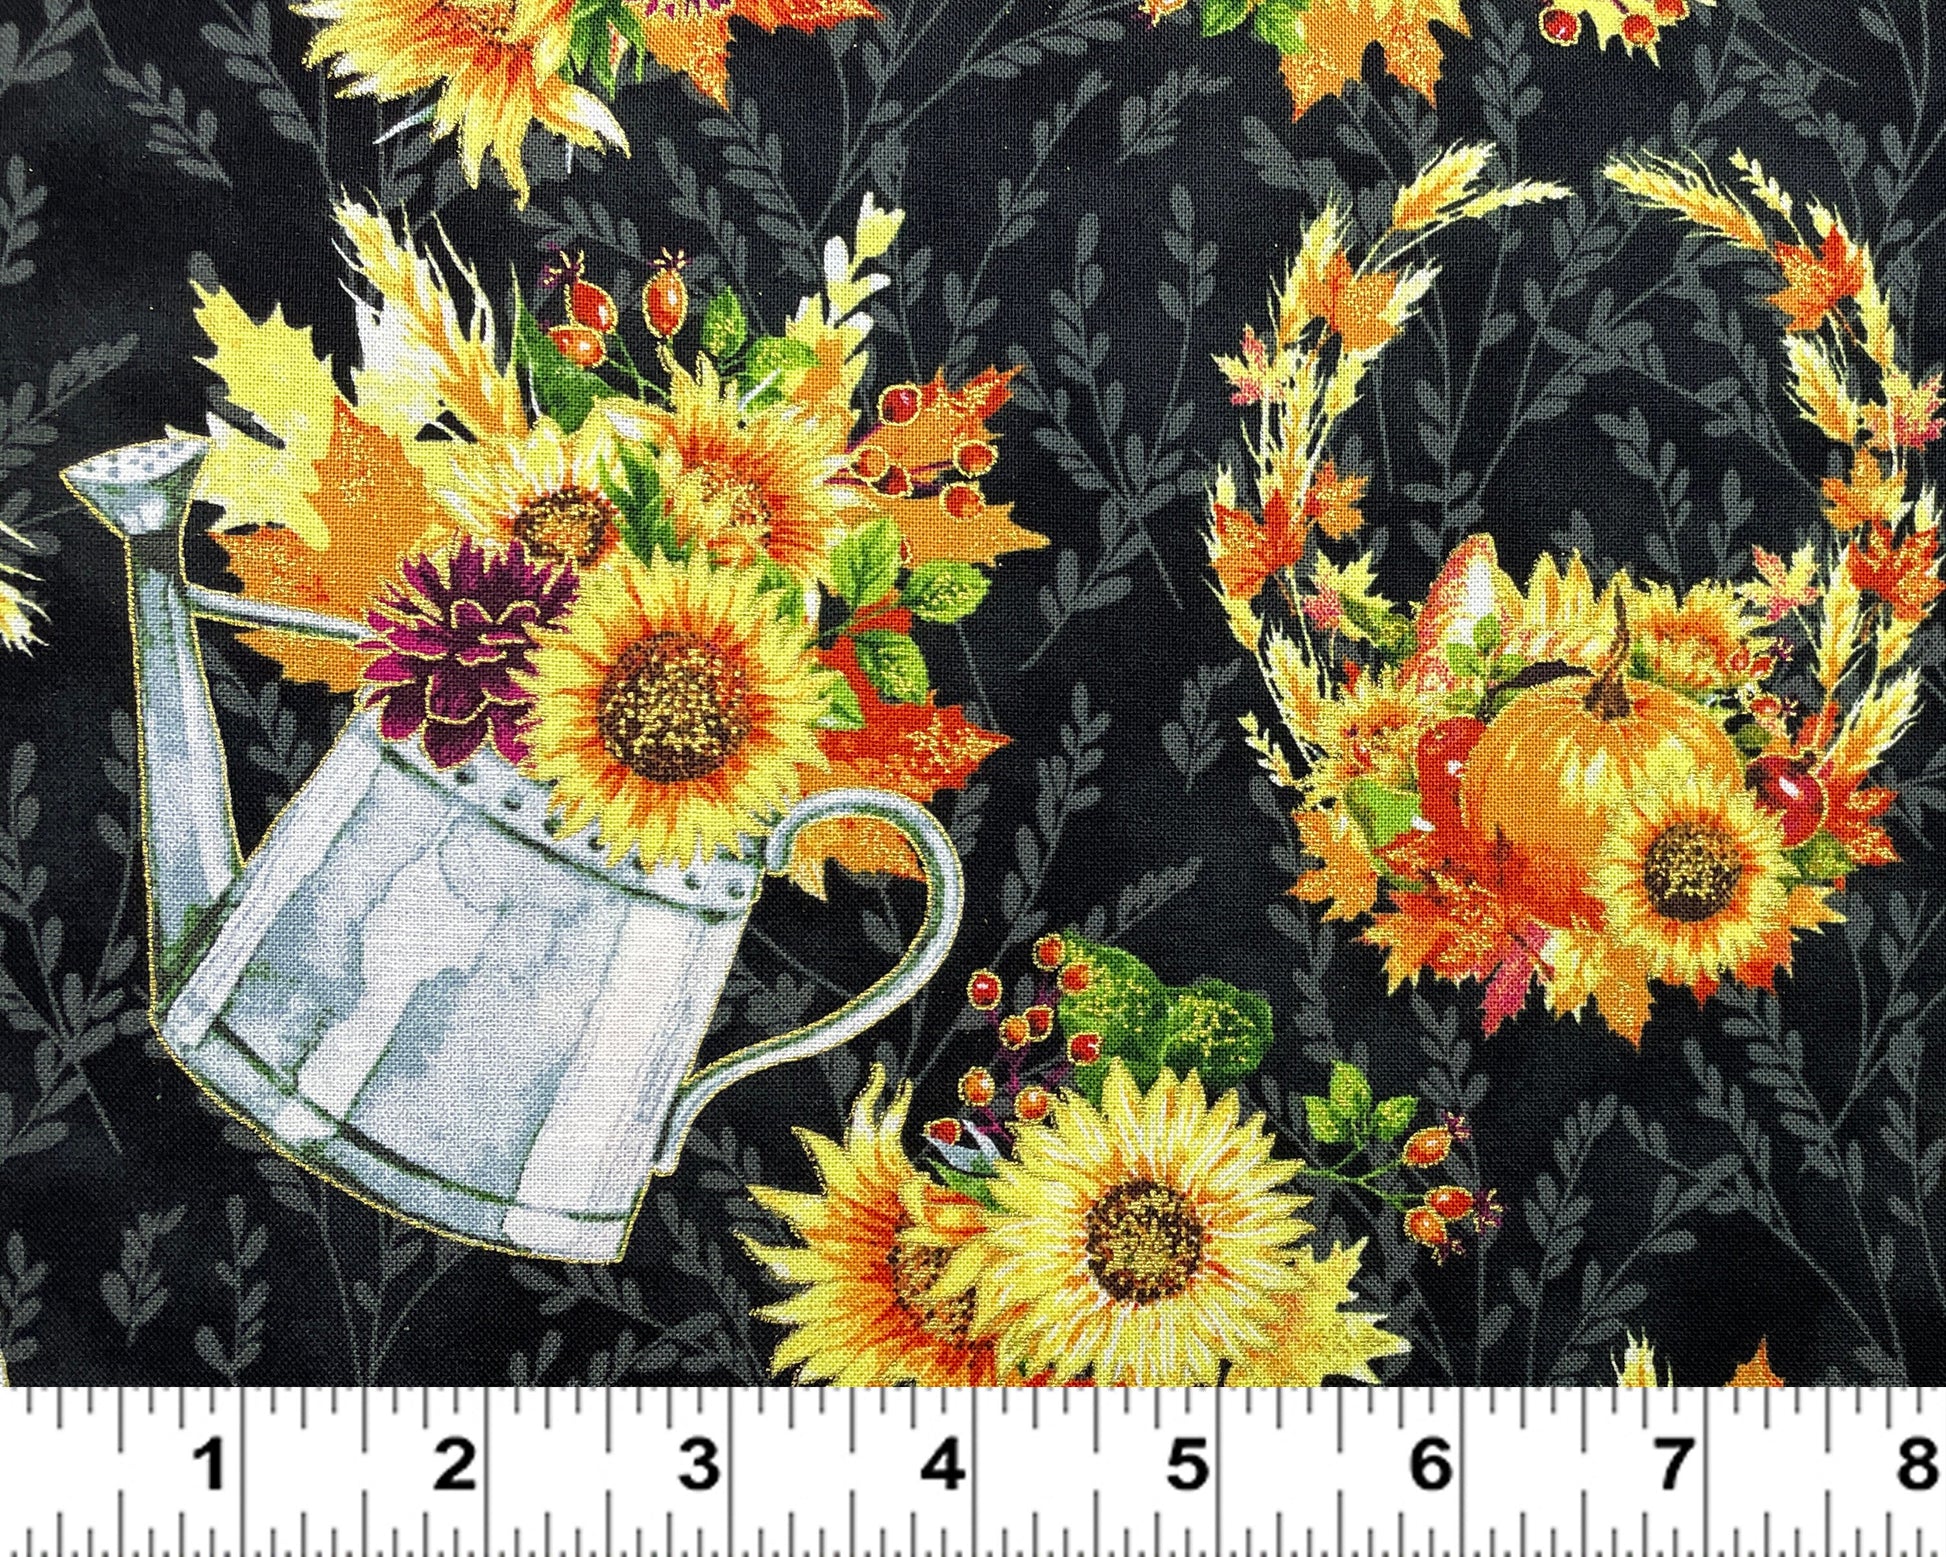 Fall Fabric - Sunflower fabric - With Metallic Accents - Fall Blooms by Hoffman - 100% Cotton - Thanksgiving material - SHIPS NEXT DAY